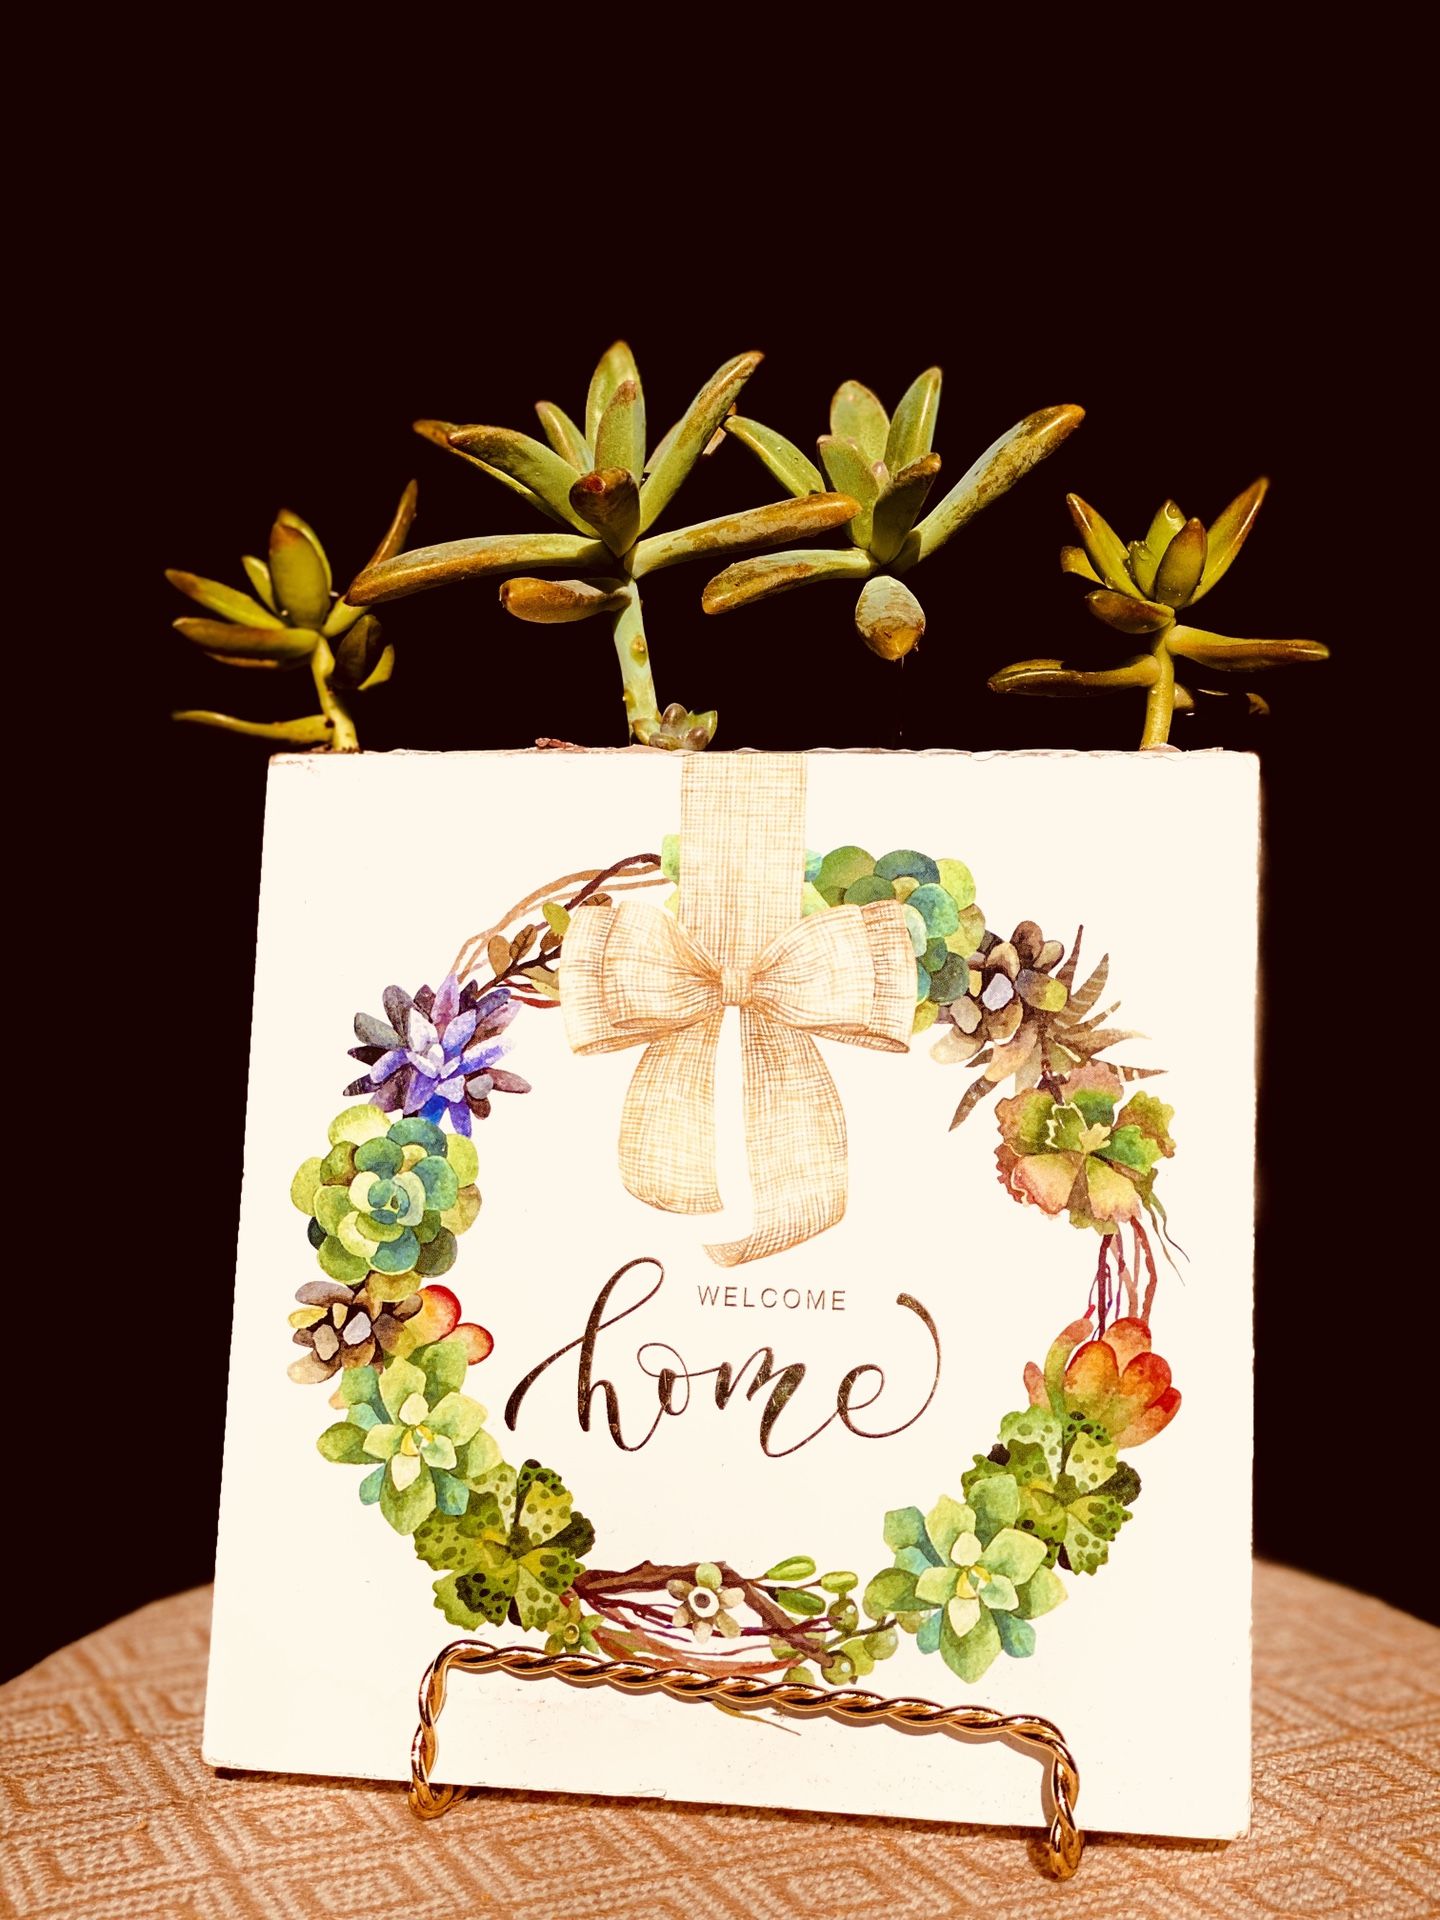 Floral arrangements Welcome sign succulents wreath picture frame live succulent frame stand gold birthday gift home decor rustic decor boho decor fa